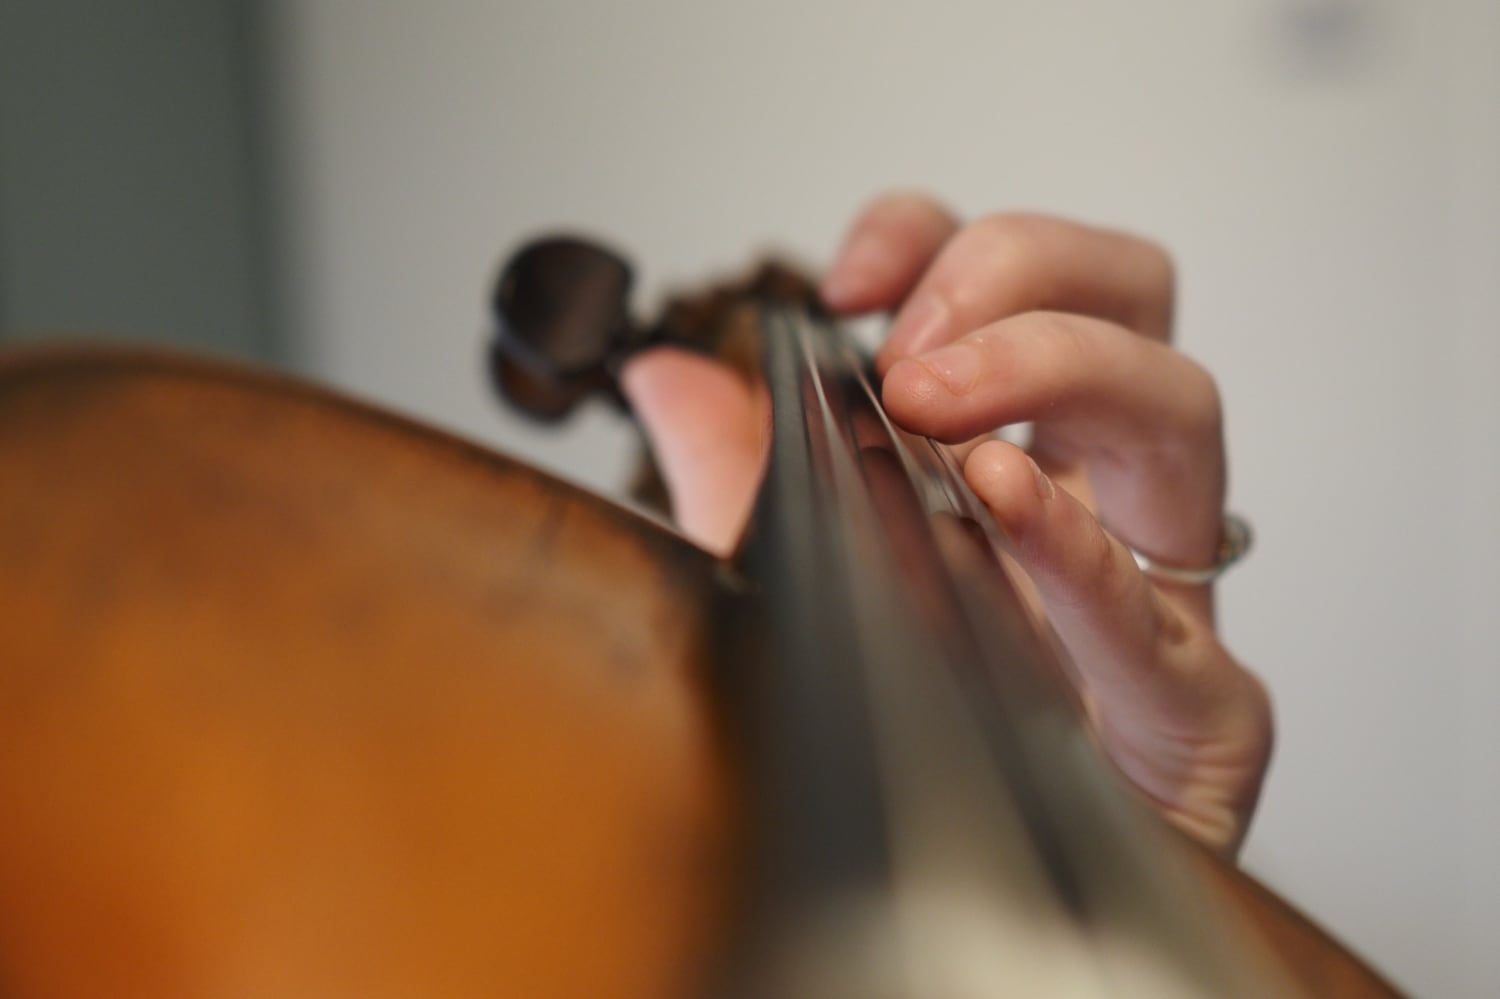 A view down the body of a violin towards the violinist’s fingers holding the neck.